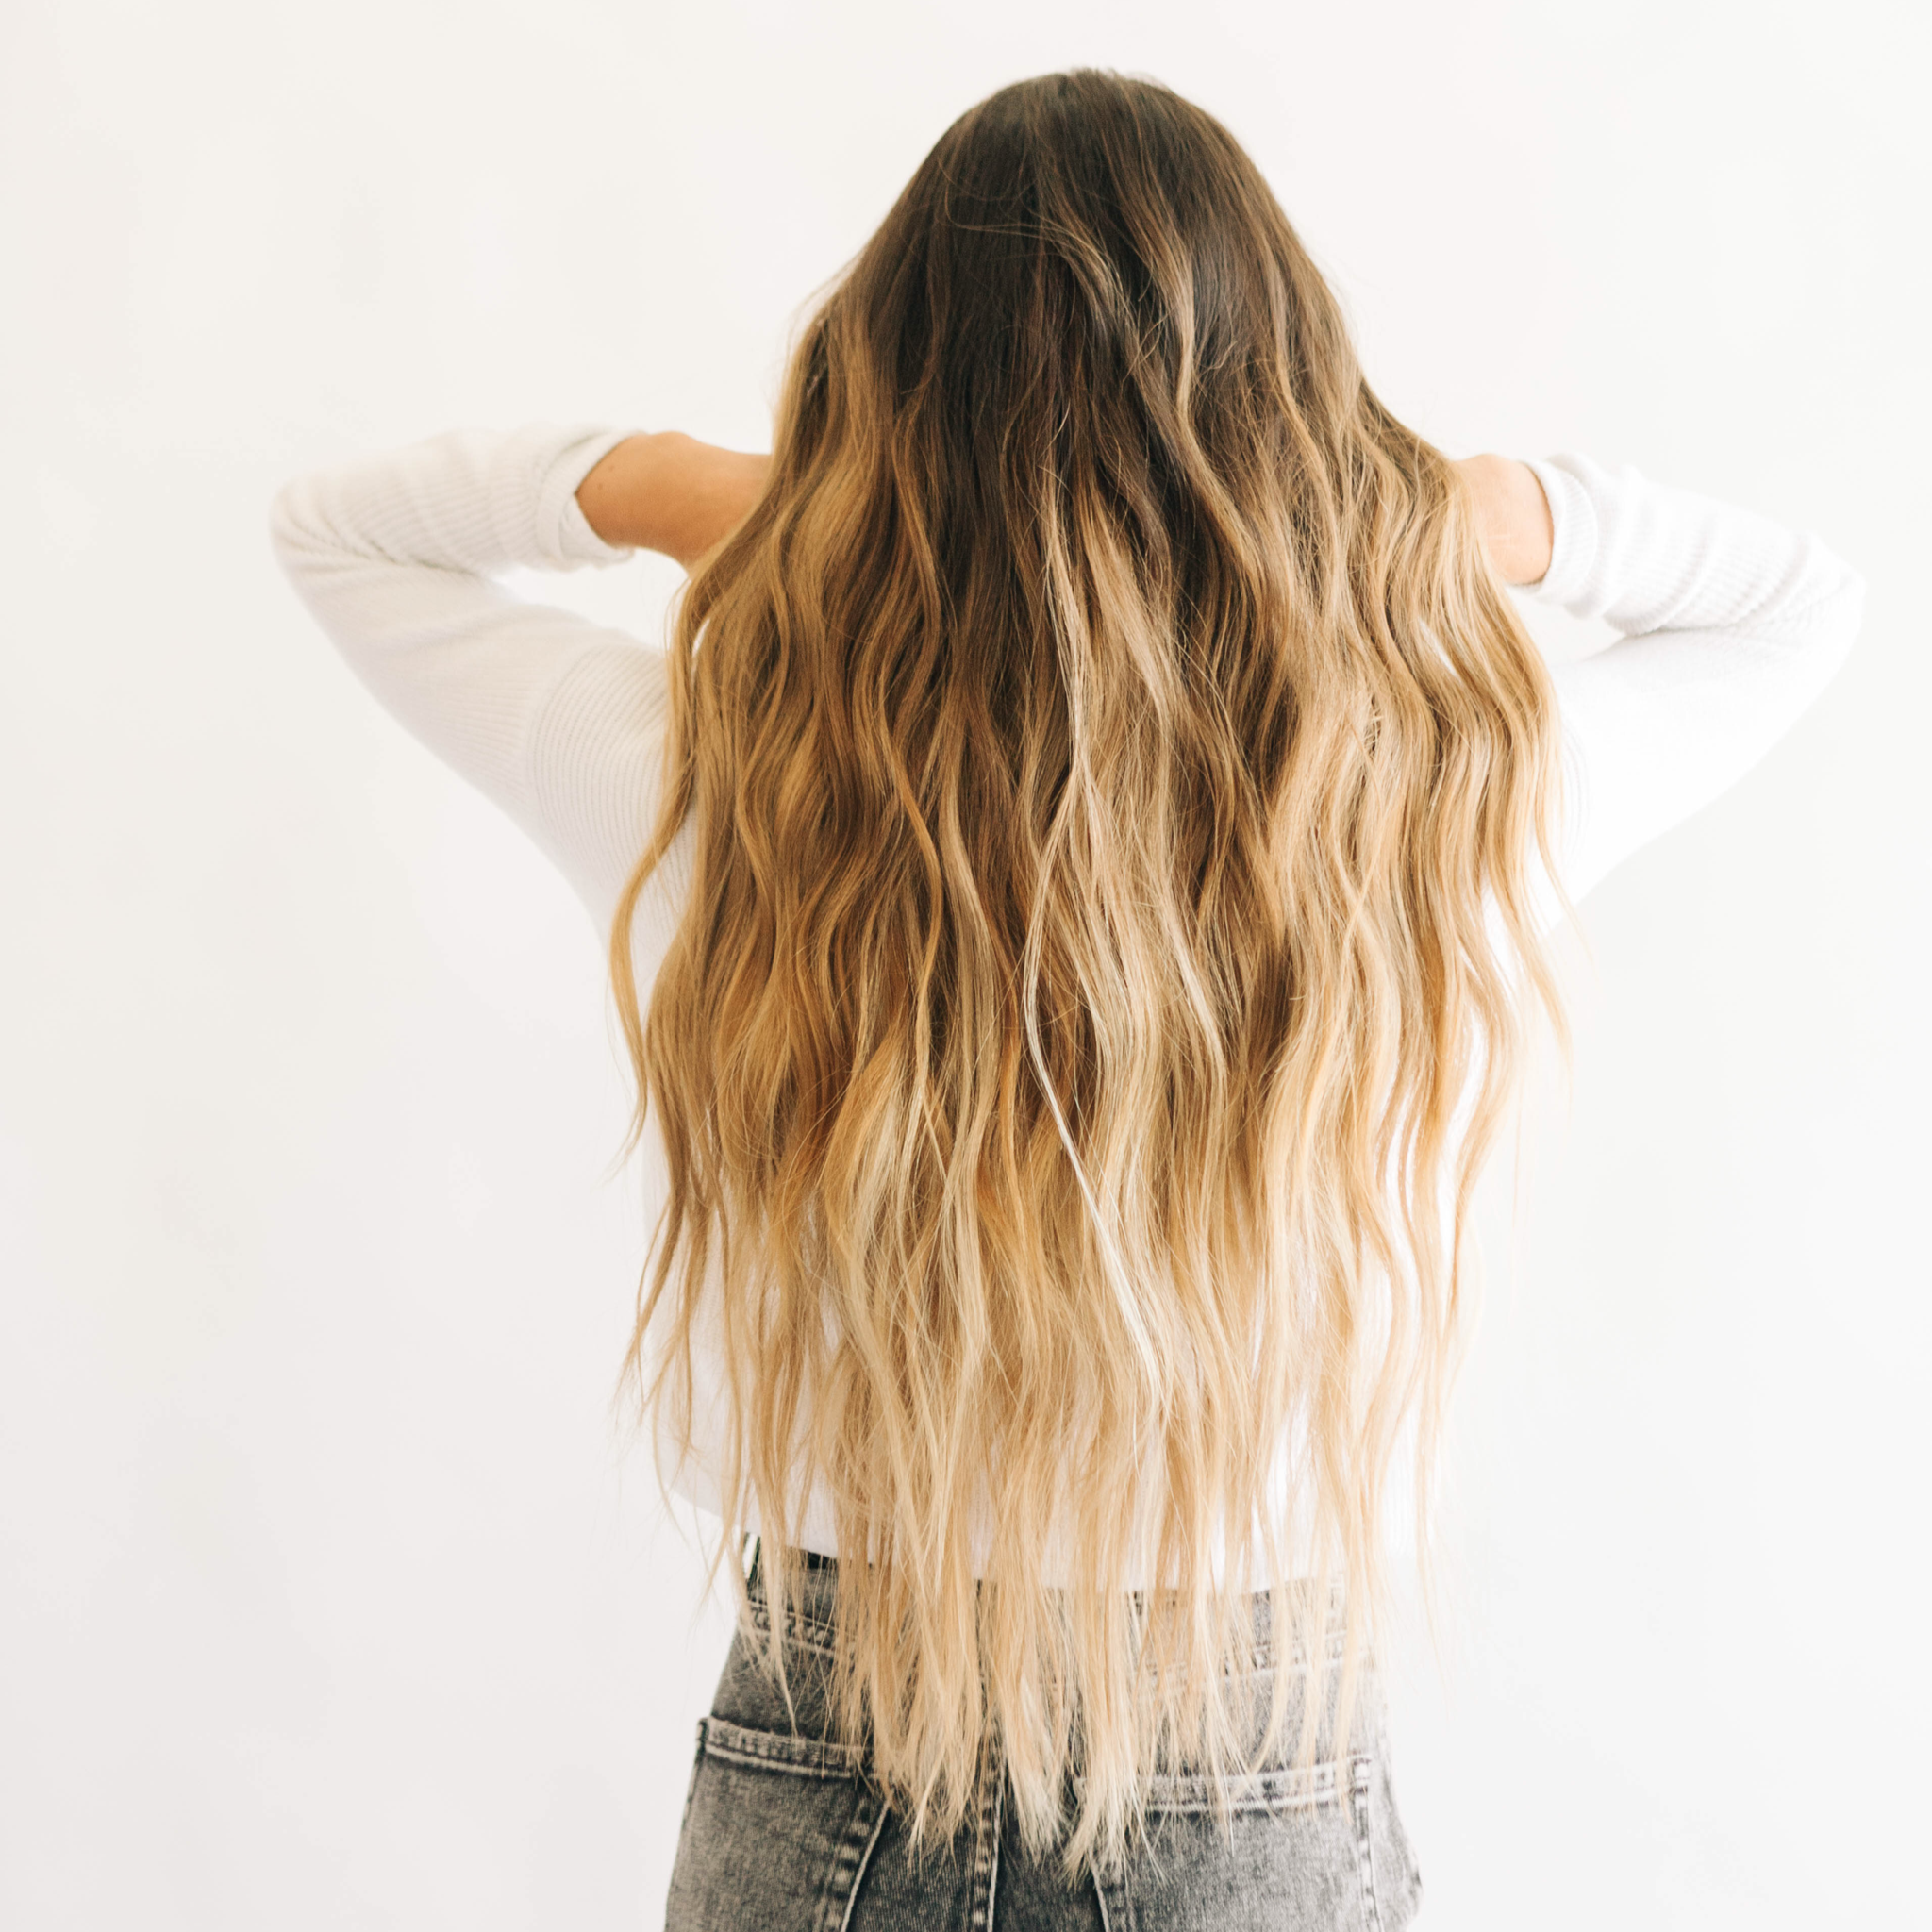 Rooted vs Ombré Hair: What’s the Difference?